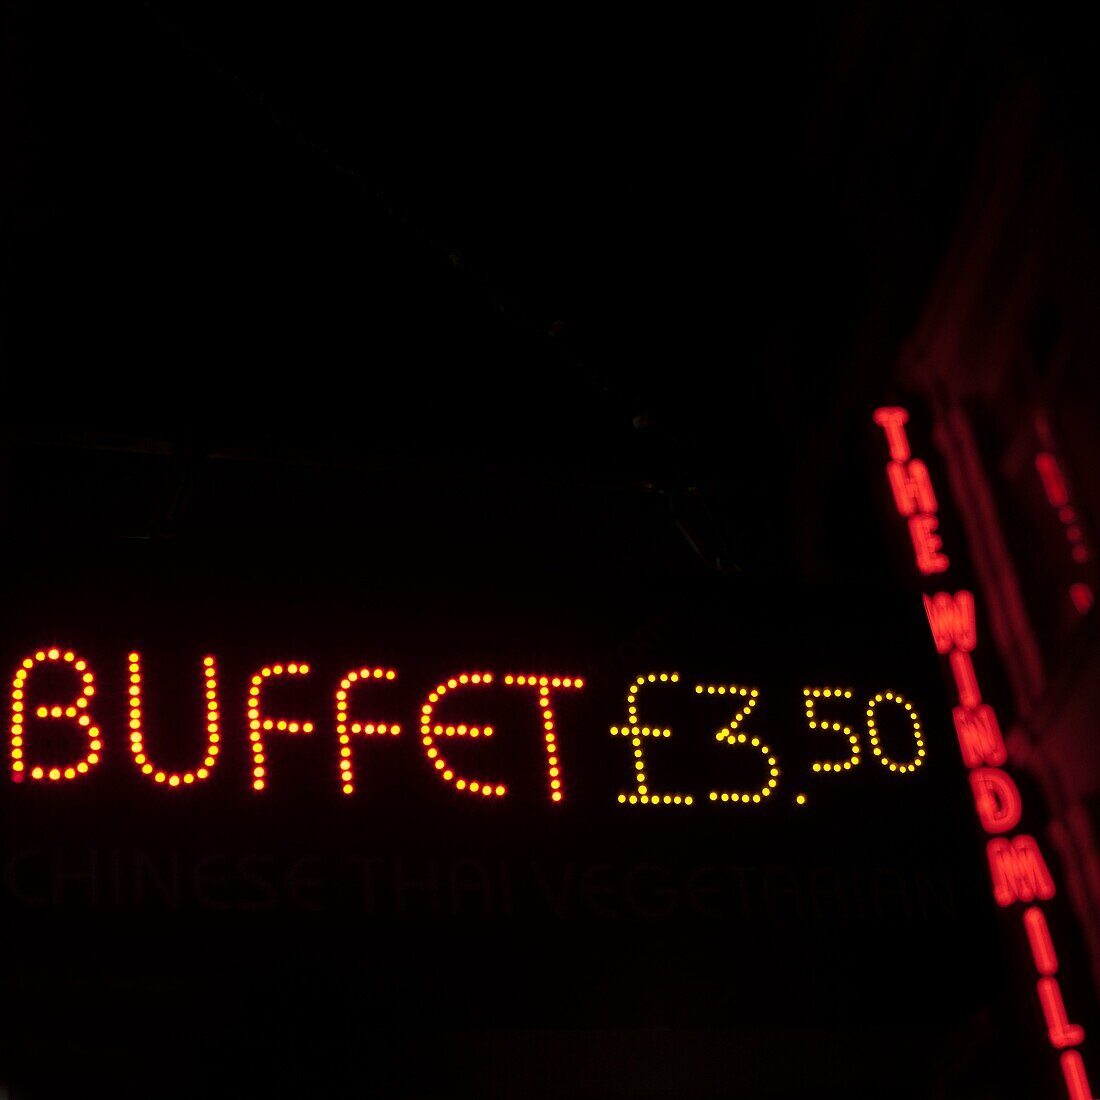 Attracting attention, buffet, Color image, concept, information, neon, night, outdoor, price, red, sign, Sterling pound, vertical, B75-1003374, AGEFOTOSTOCK